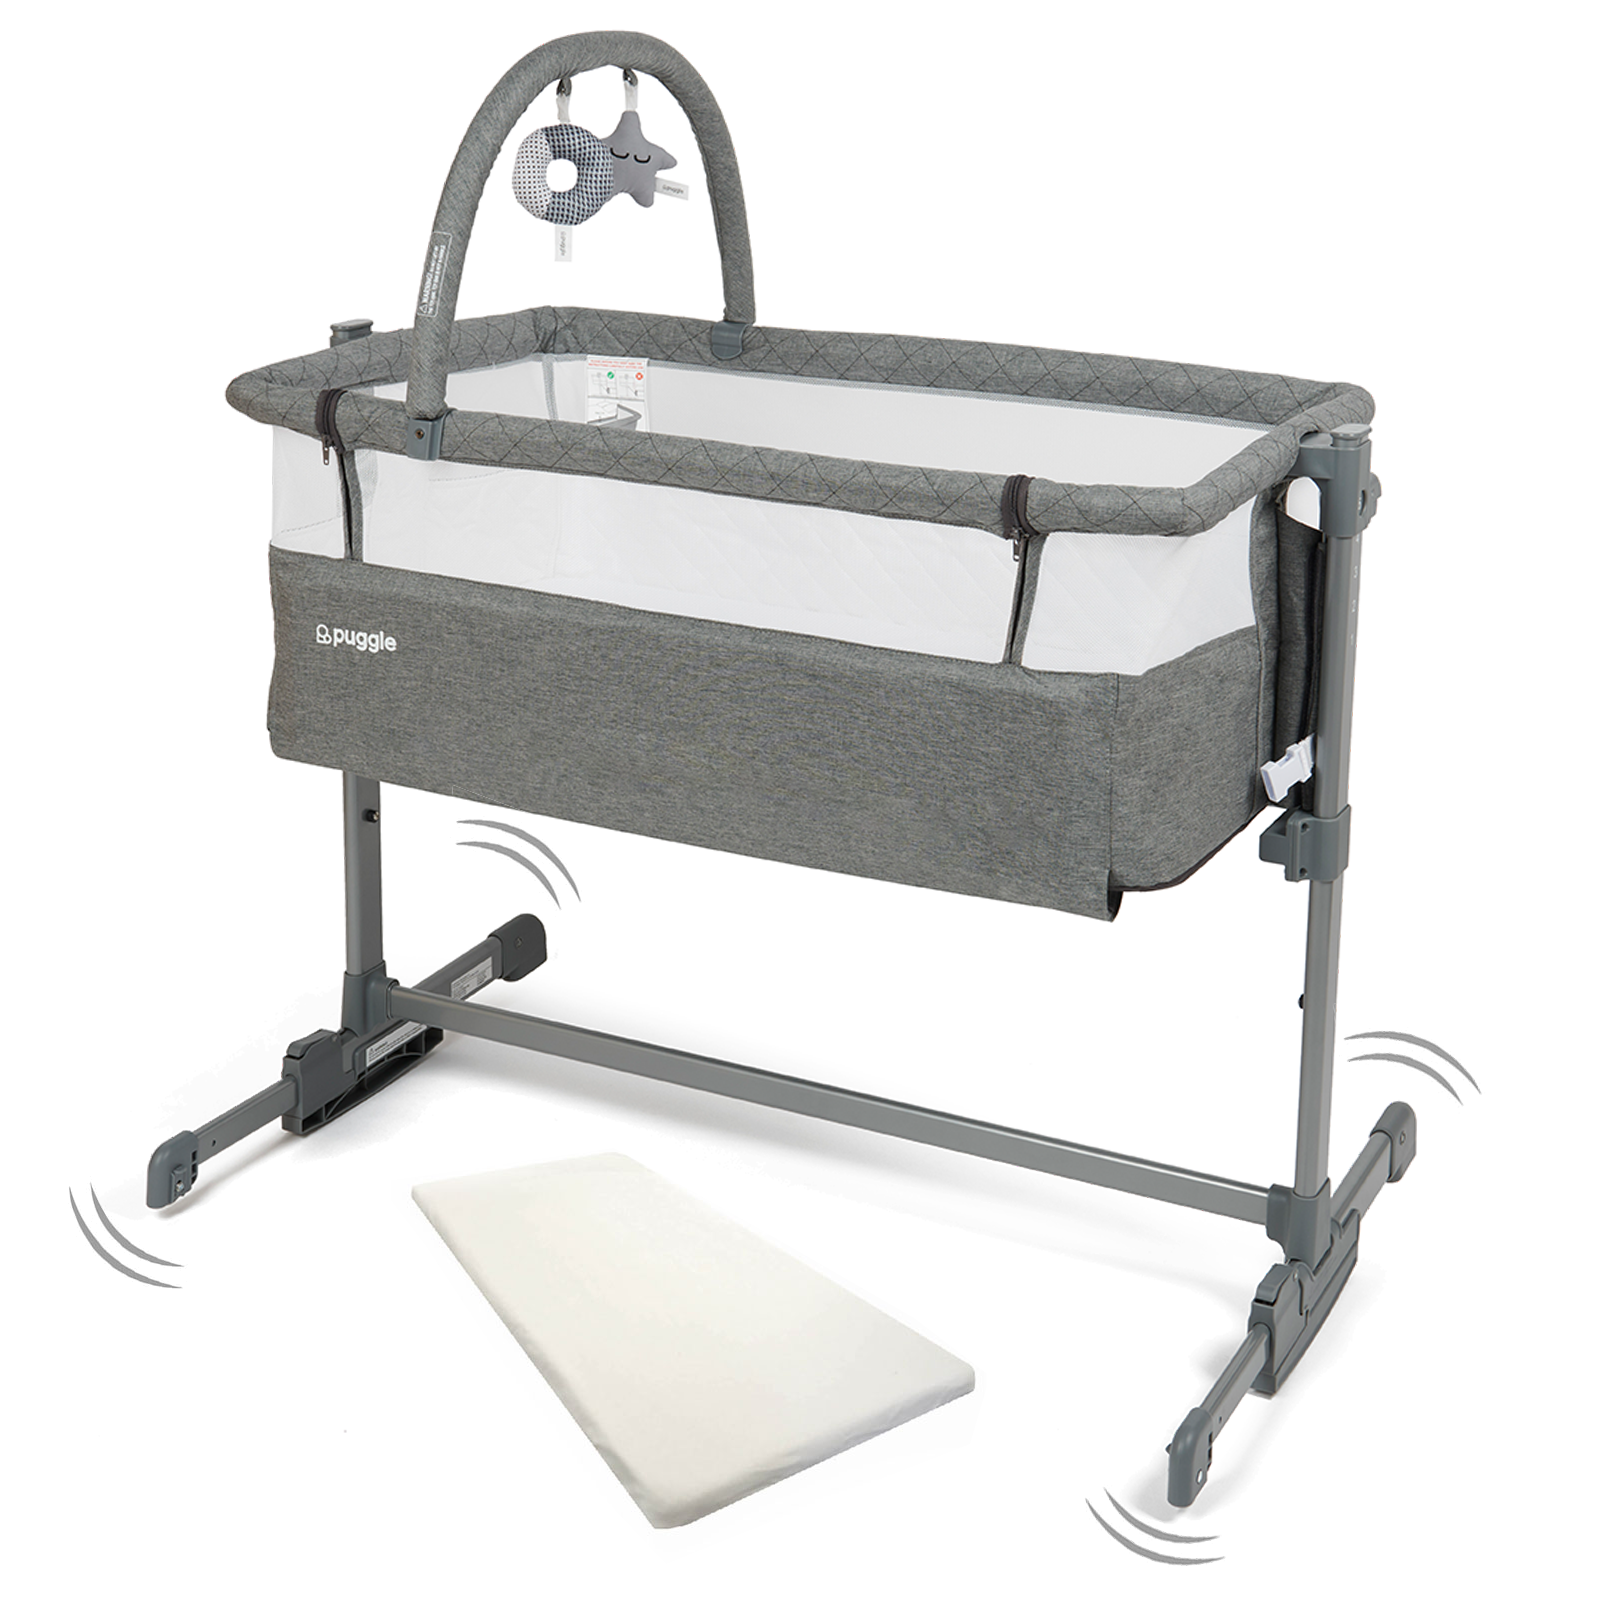 Puggle Sleepy Rocking Bedside Crib with Toy Bar & Fitted Sheet – Graphite Grey